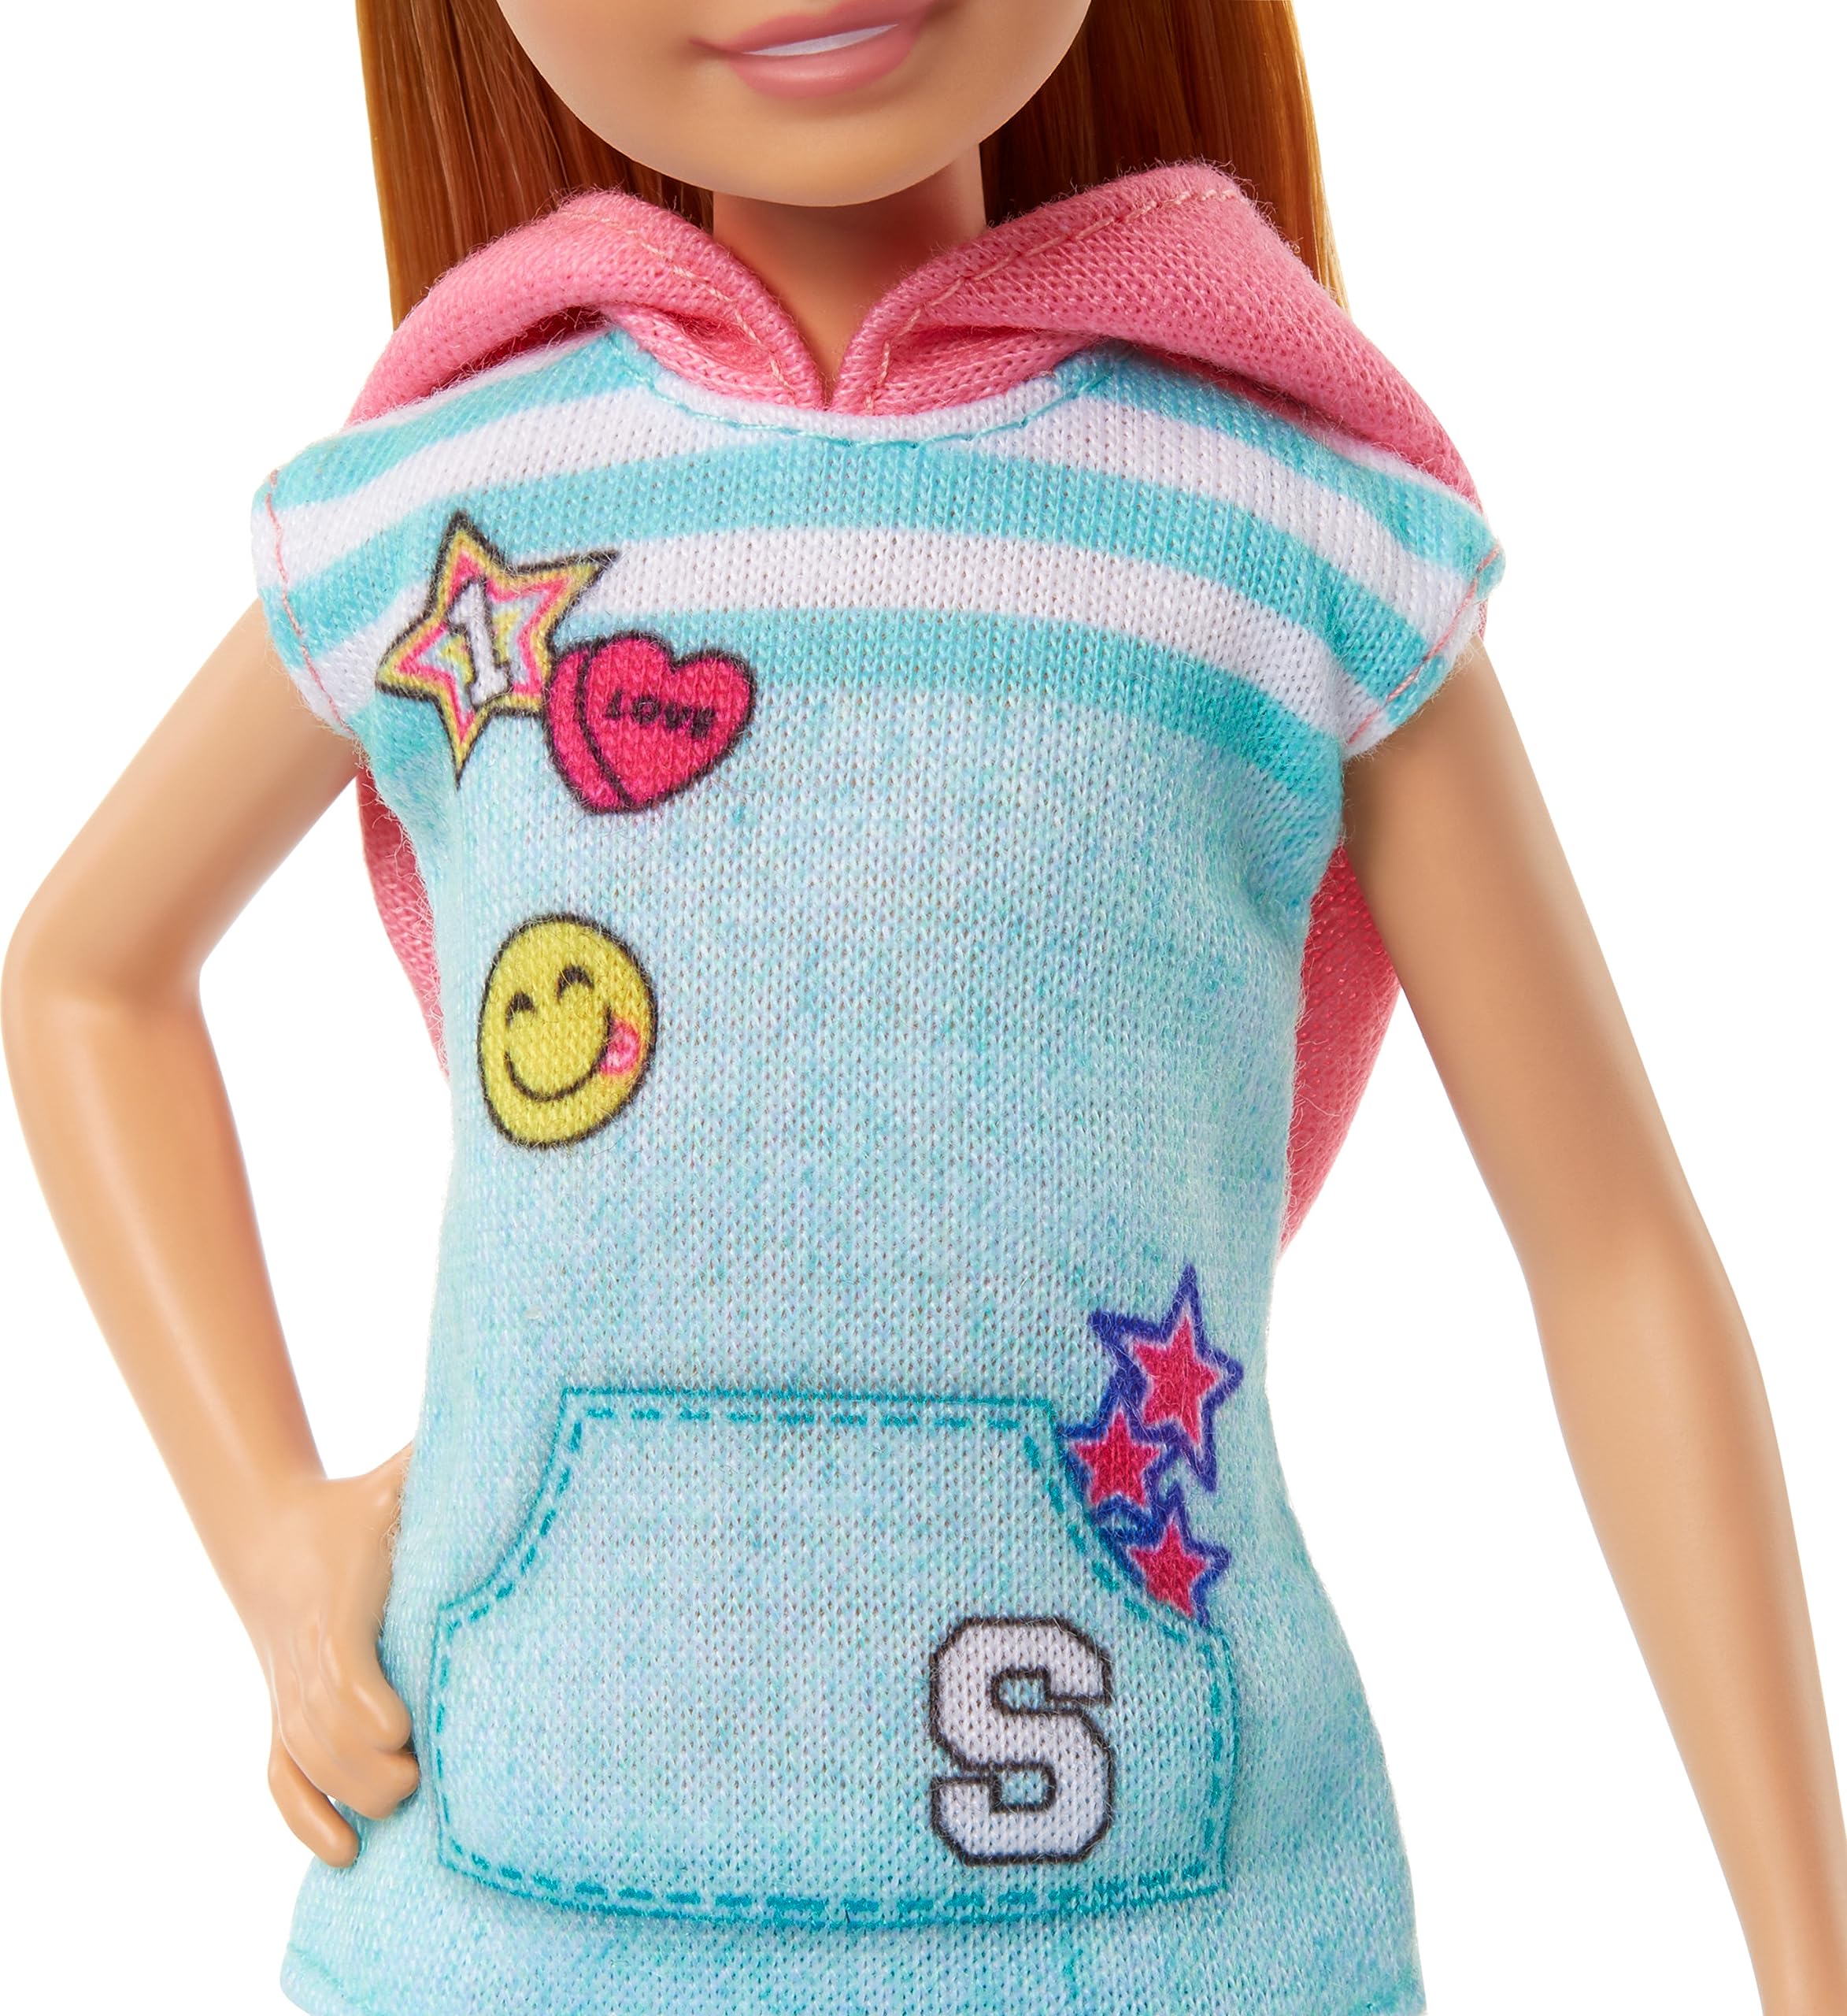 Barbie Stacie Doll with Pet Dog, from and Stacie to The Rescue Movie Toys, Blonde Hair Doll